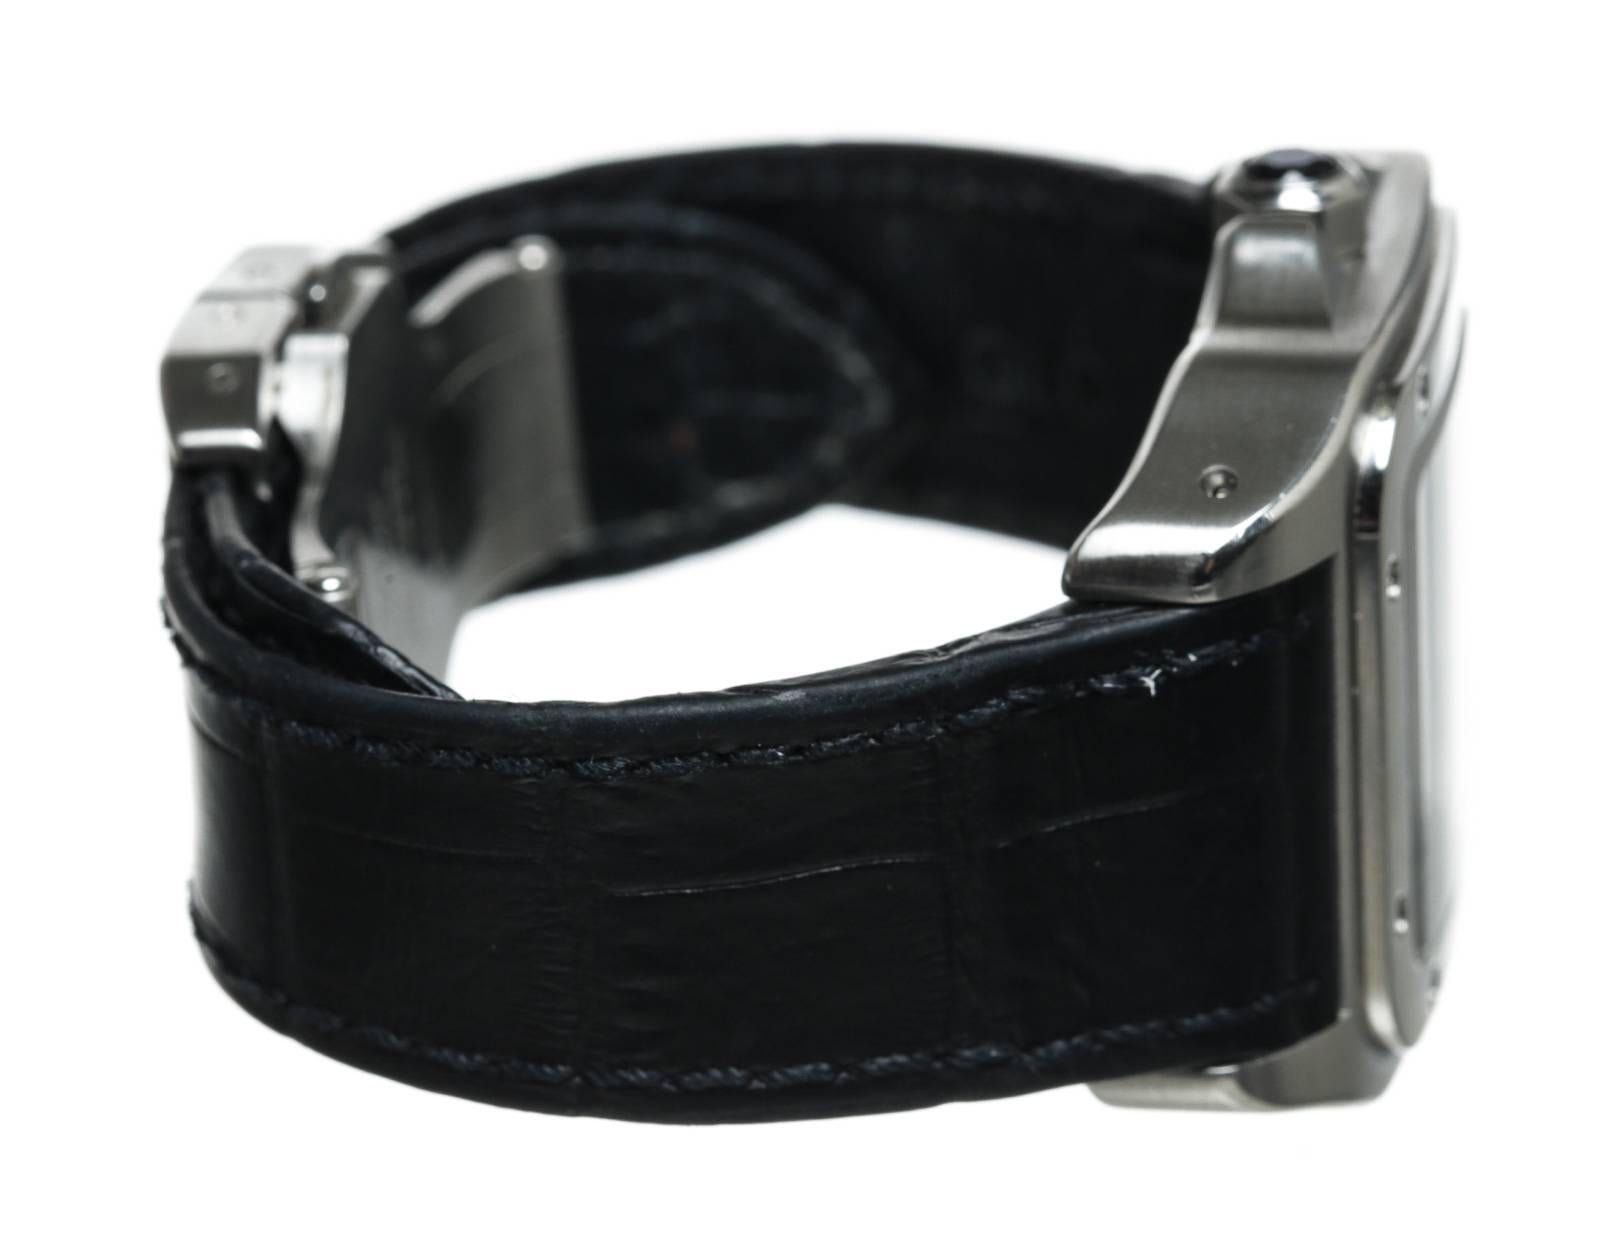  Cartier Stainless Steel Santos 100 Wristwatch In Good Condition For Sale In Corona Del Mar, CA